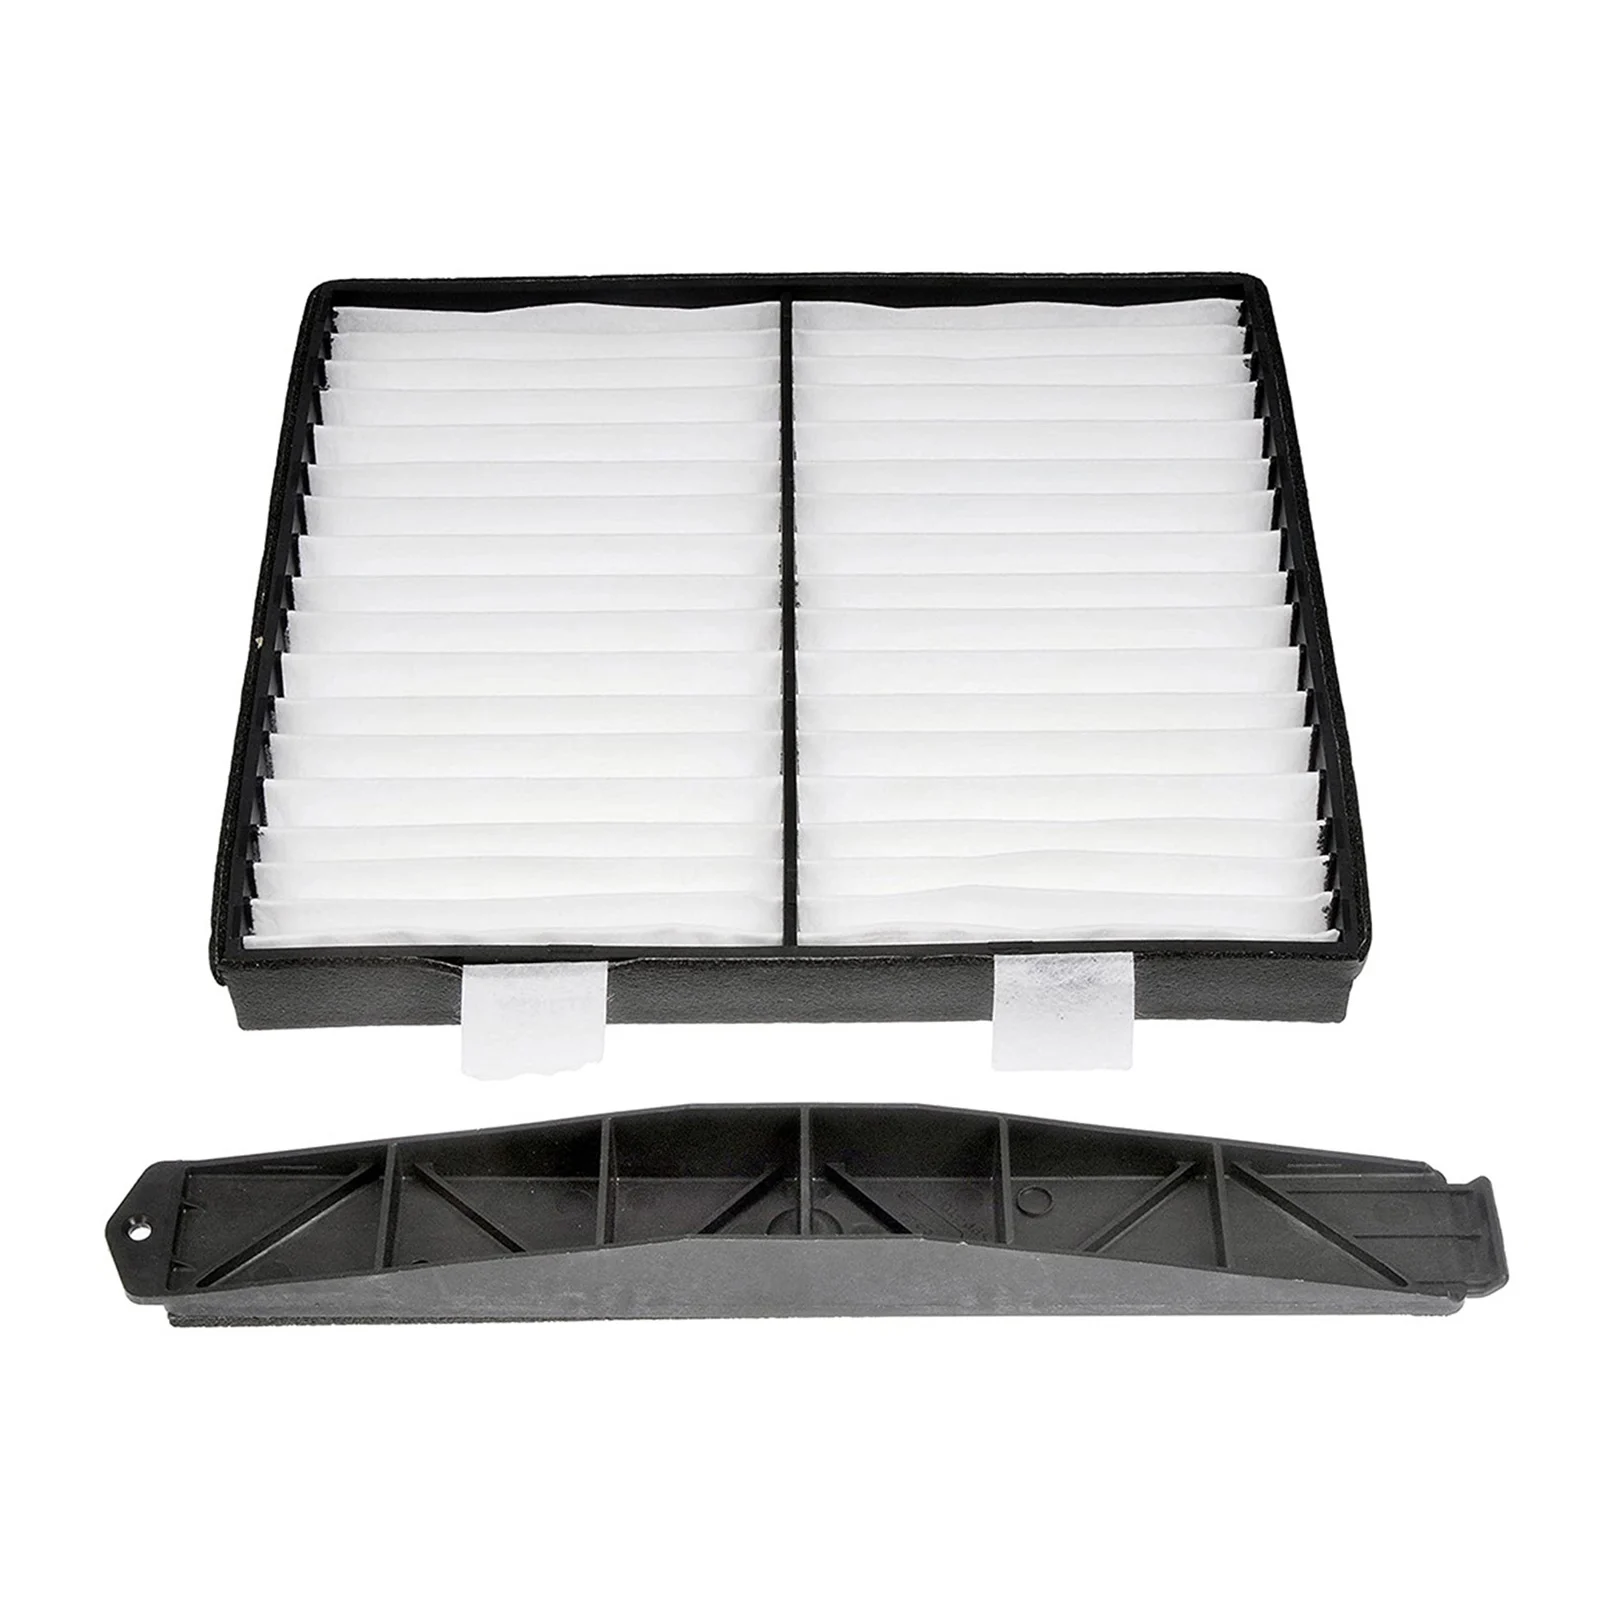 

Cabin Air Filter Kit Retrofit Kit For 2007-2014 Replaces OE 22759208